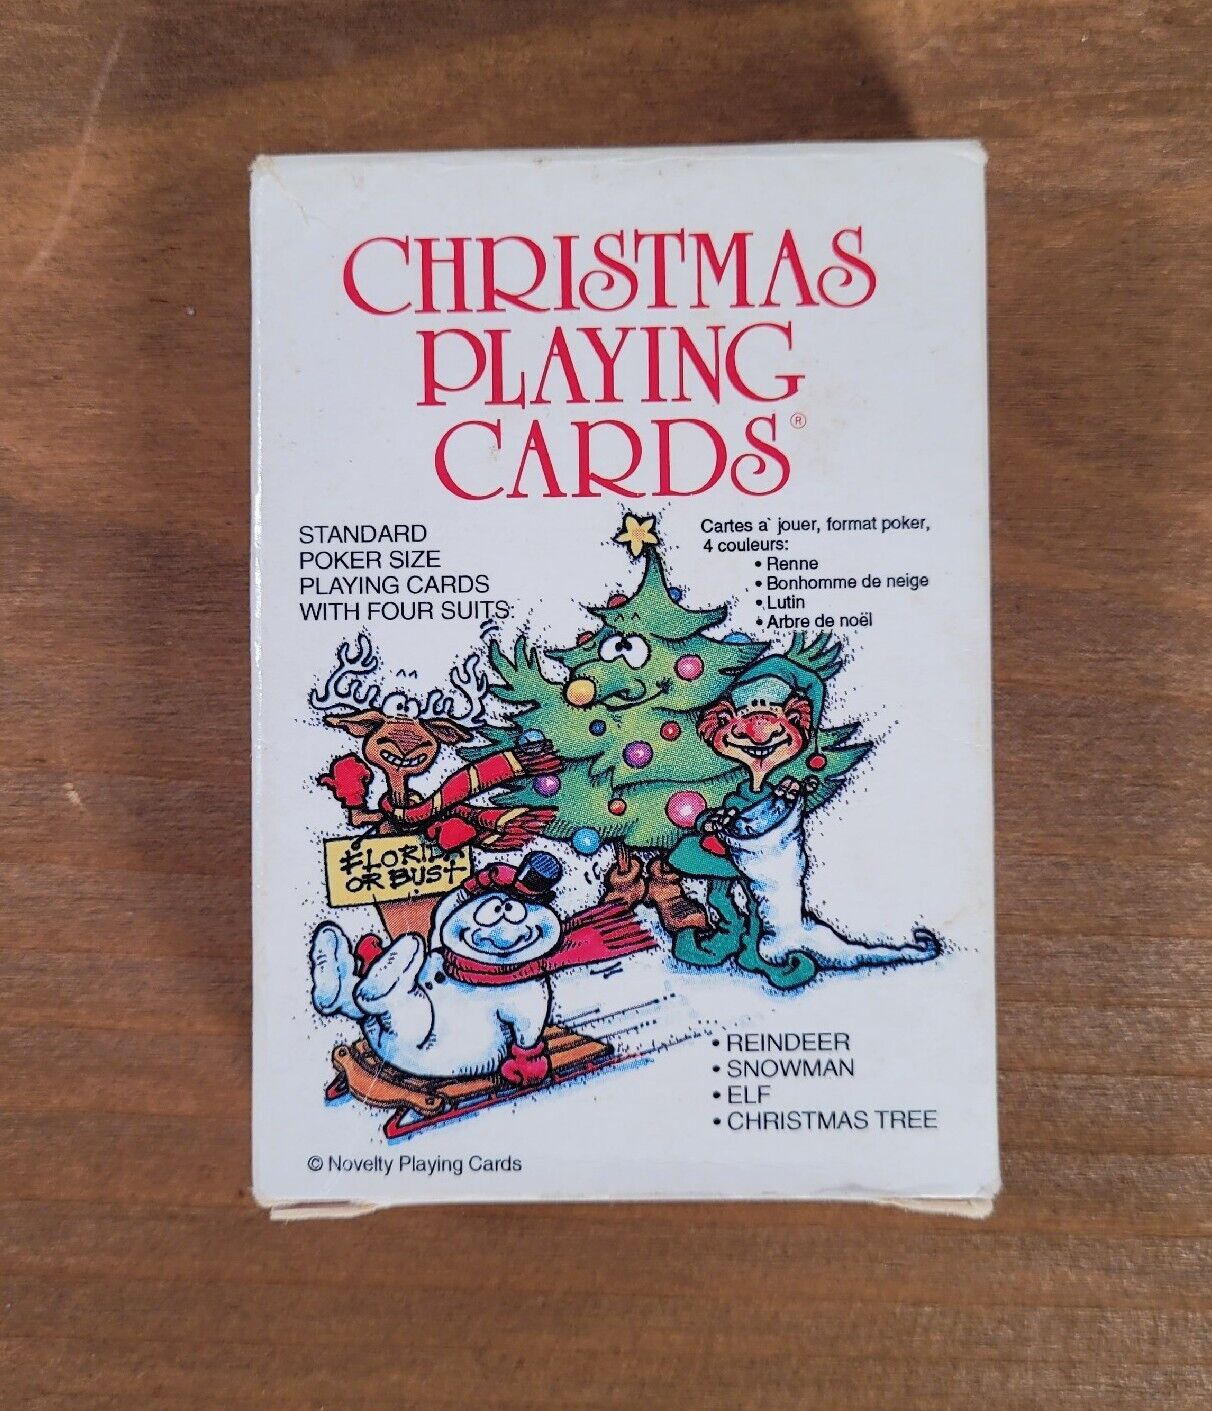 Vintage 1986 Christmas Comedy Novelty Playing Cards Reindeer, Snowman, Elf, Tree